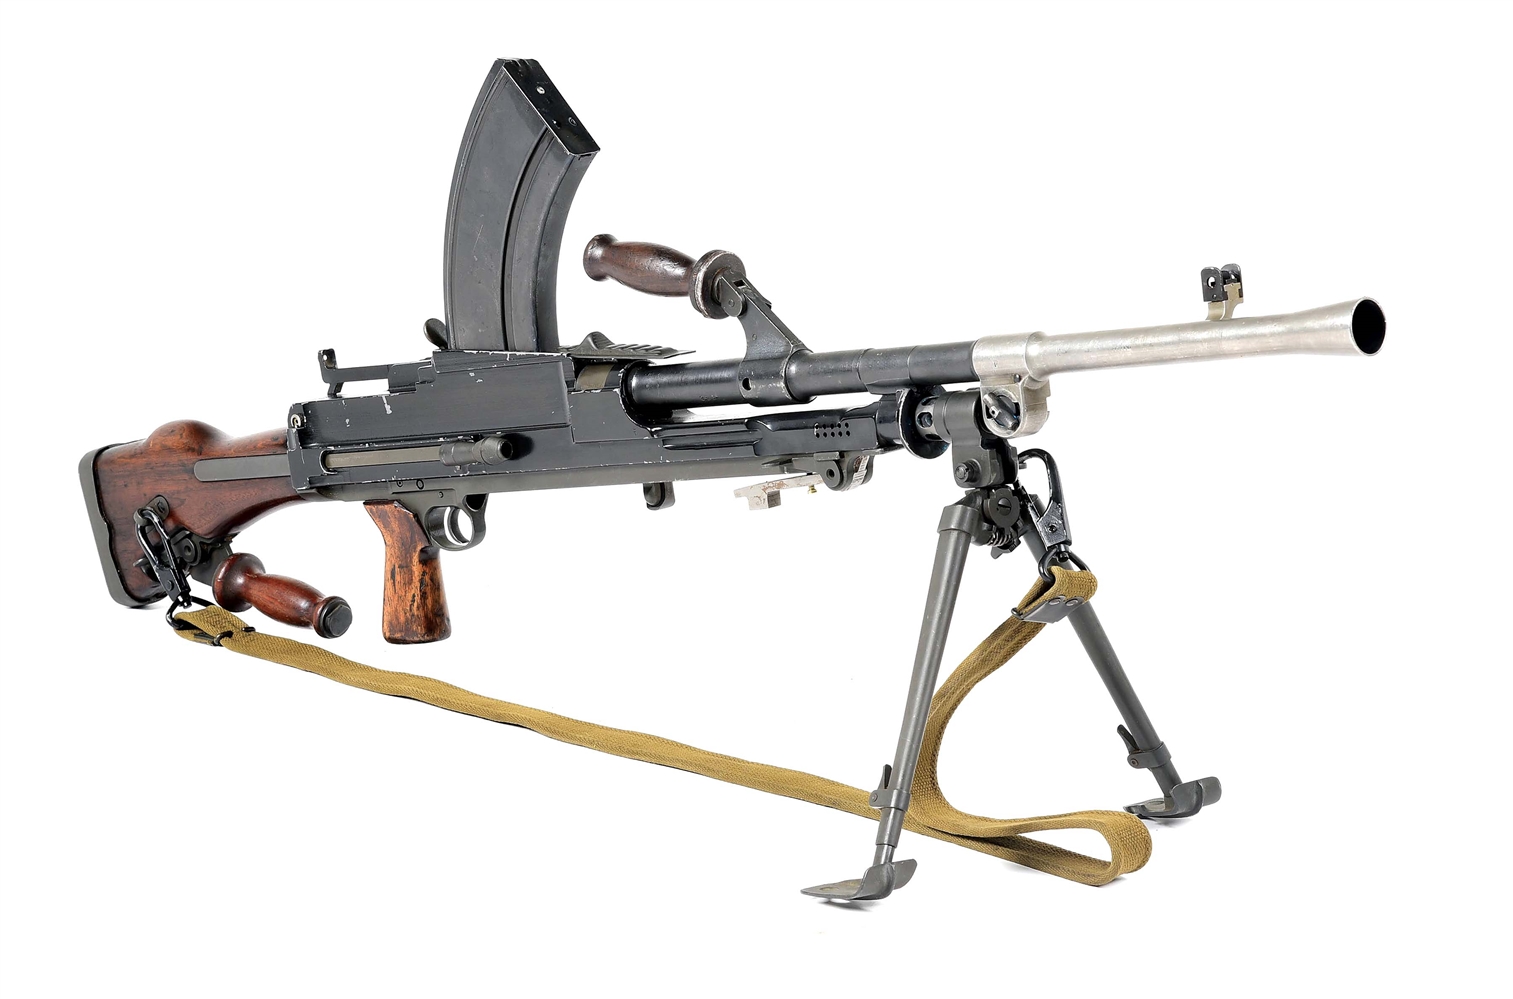 (N) BRITISH ROYAL SMALL ARMS FACTORY ENFIELD "1943" DATED BREN MK I LIGHT MACHINE GUN WITH ACCESSORIES (CURIO & RELIC).